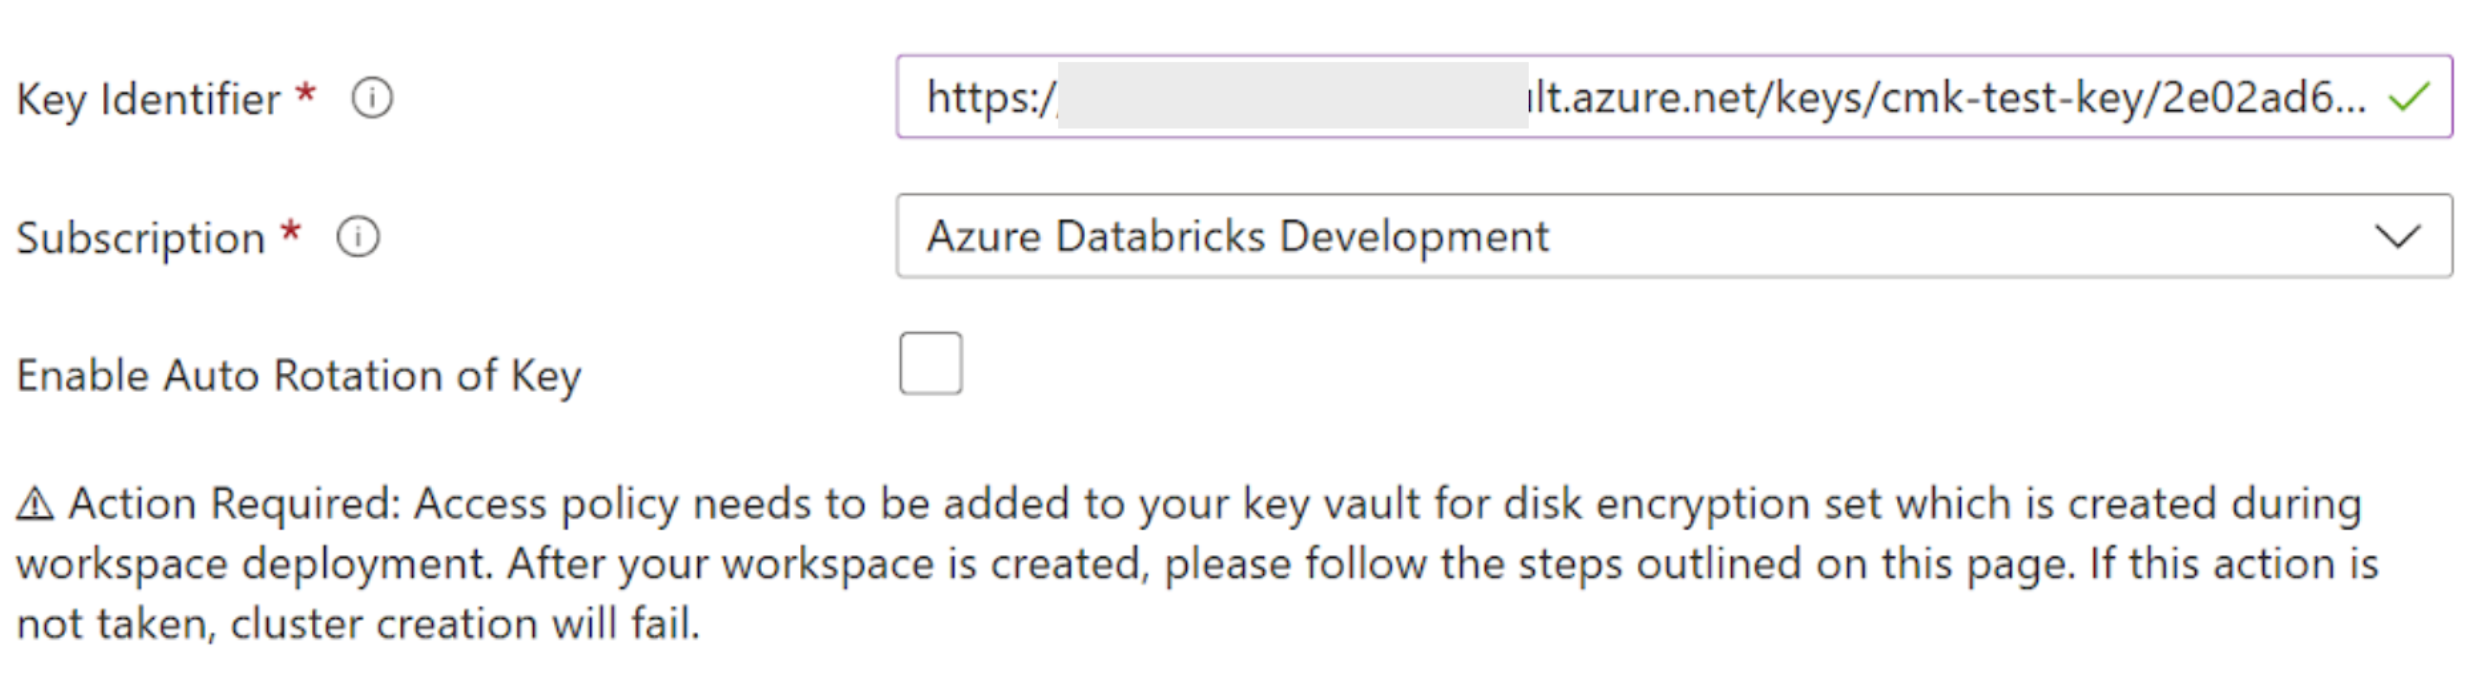 Show fields in the Managed Disks section of the Azure Databricks blade